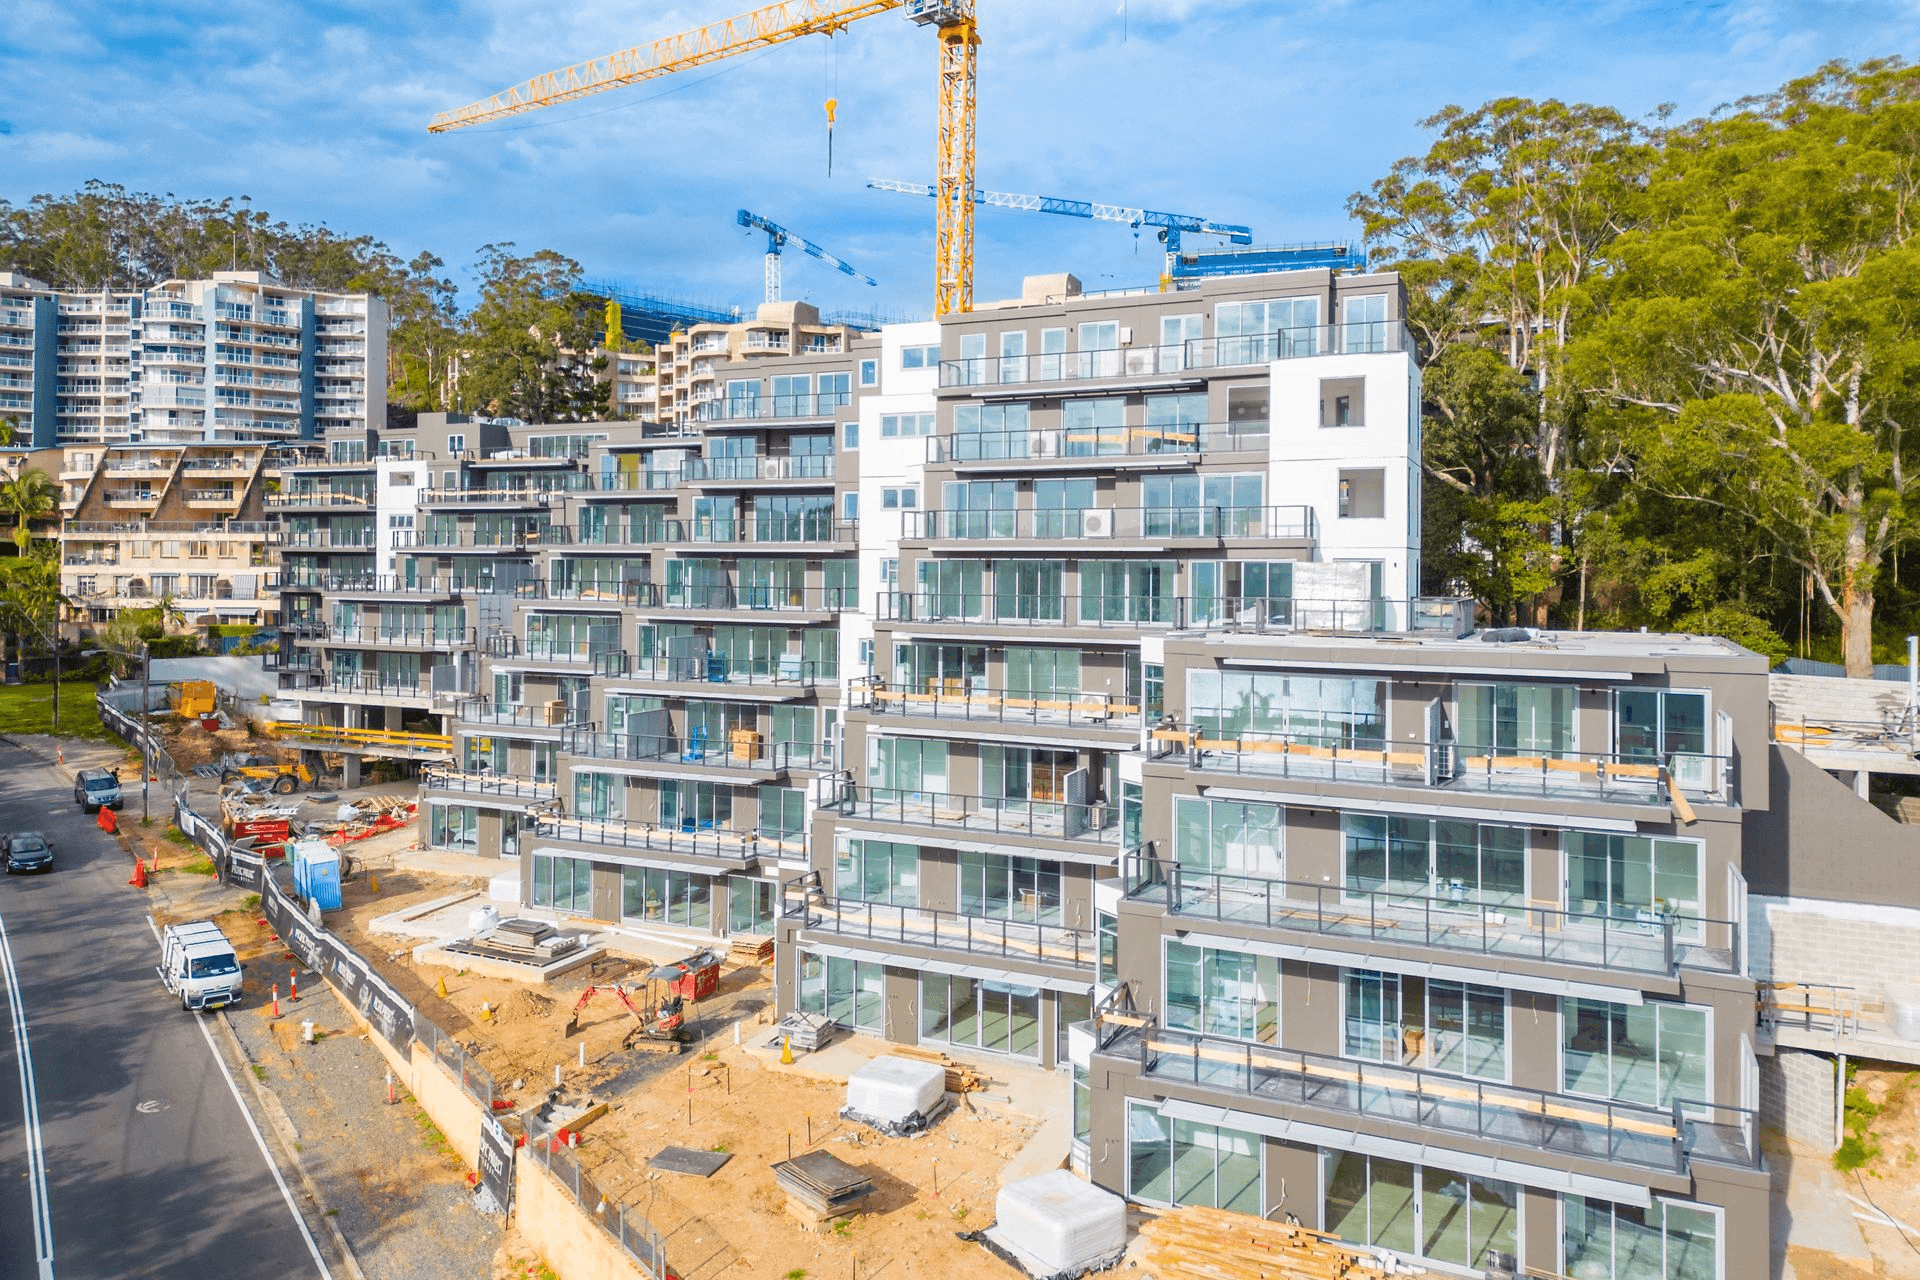 Level 10/1004C/79 Henry Parry Drive, Gosford, NSW 2250